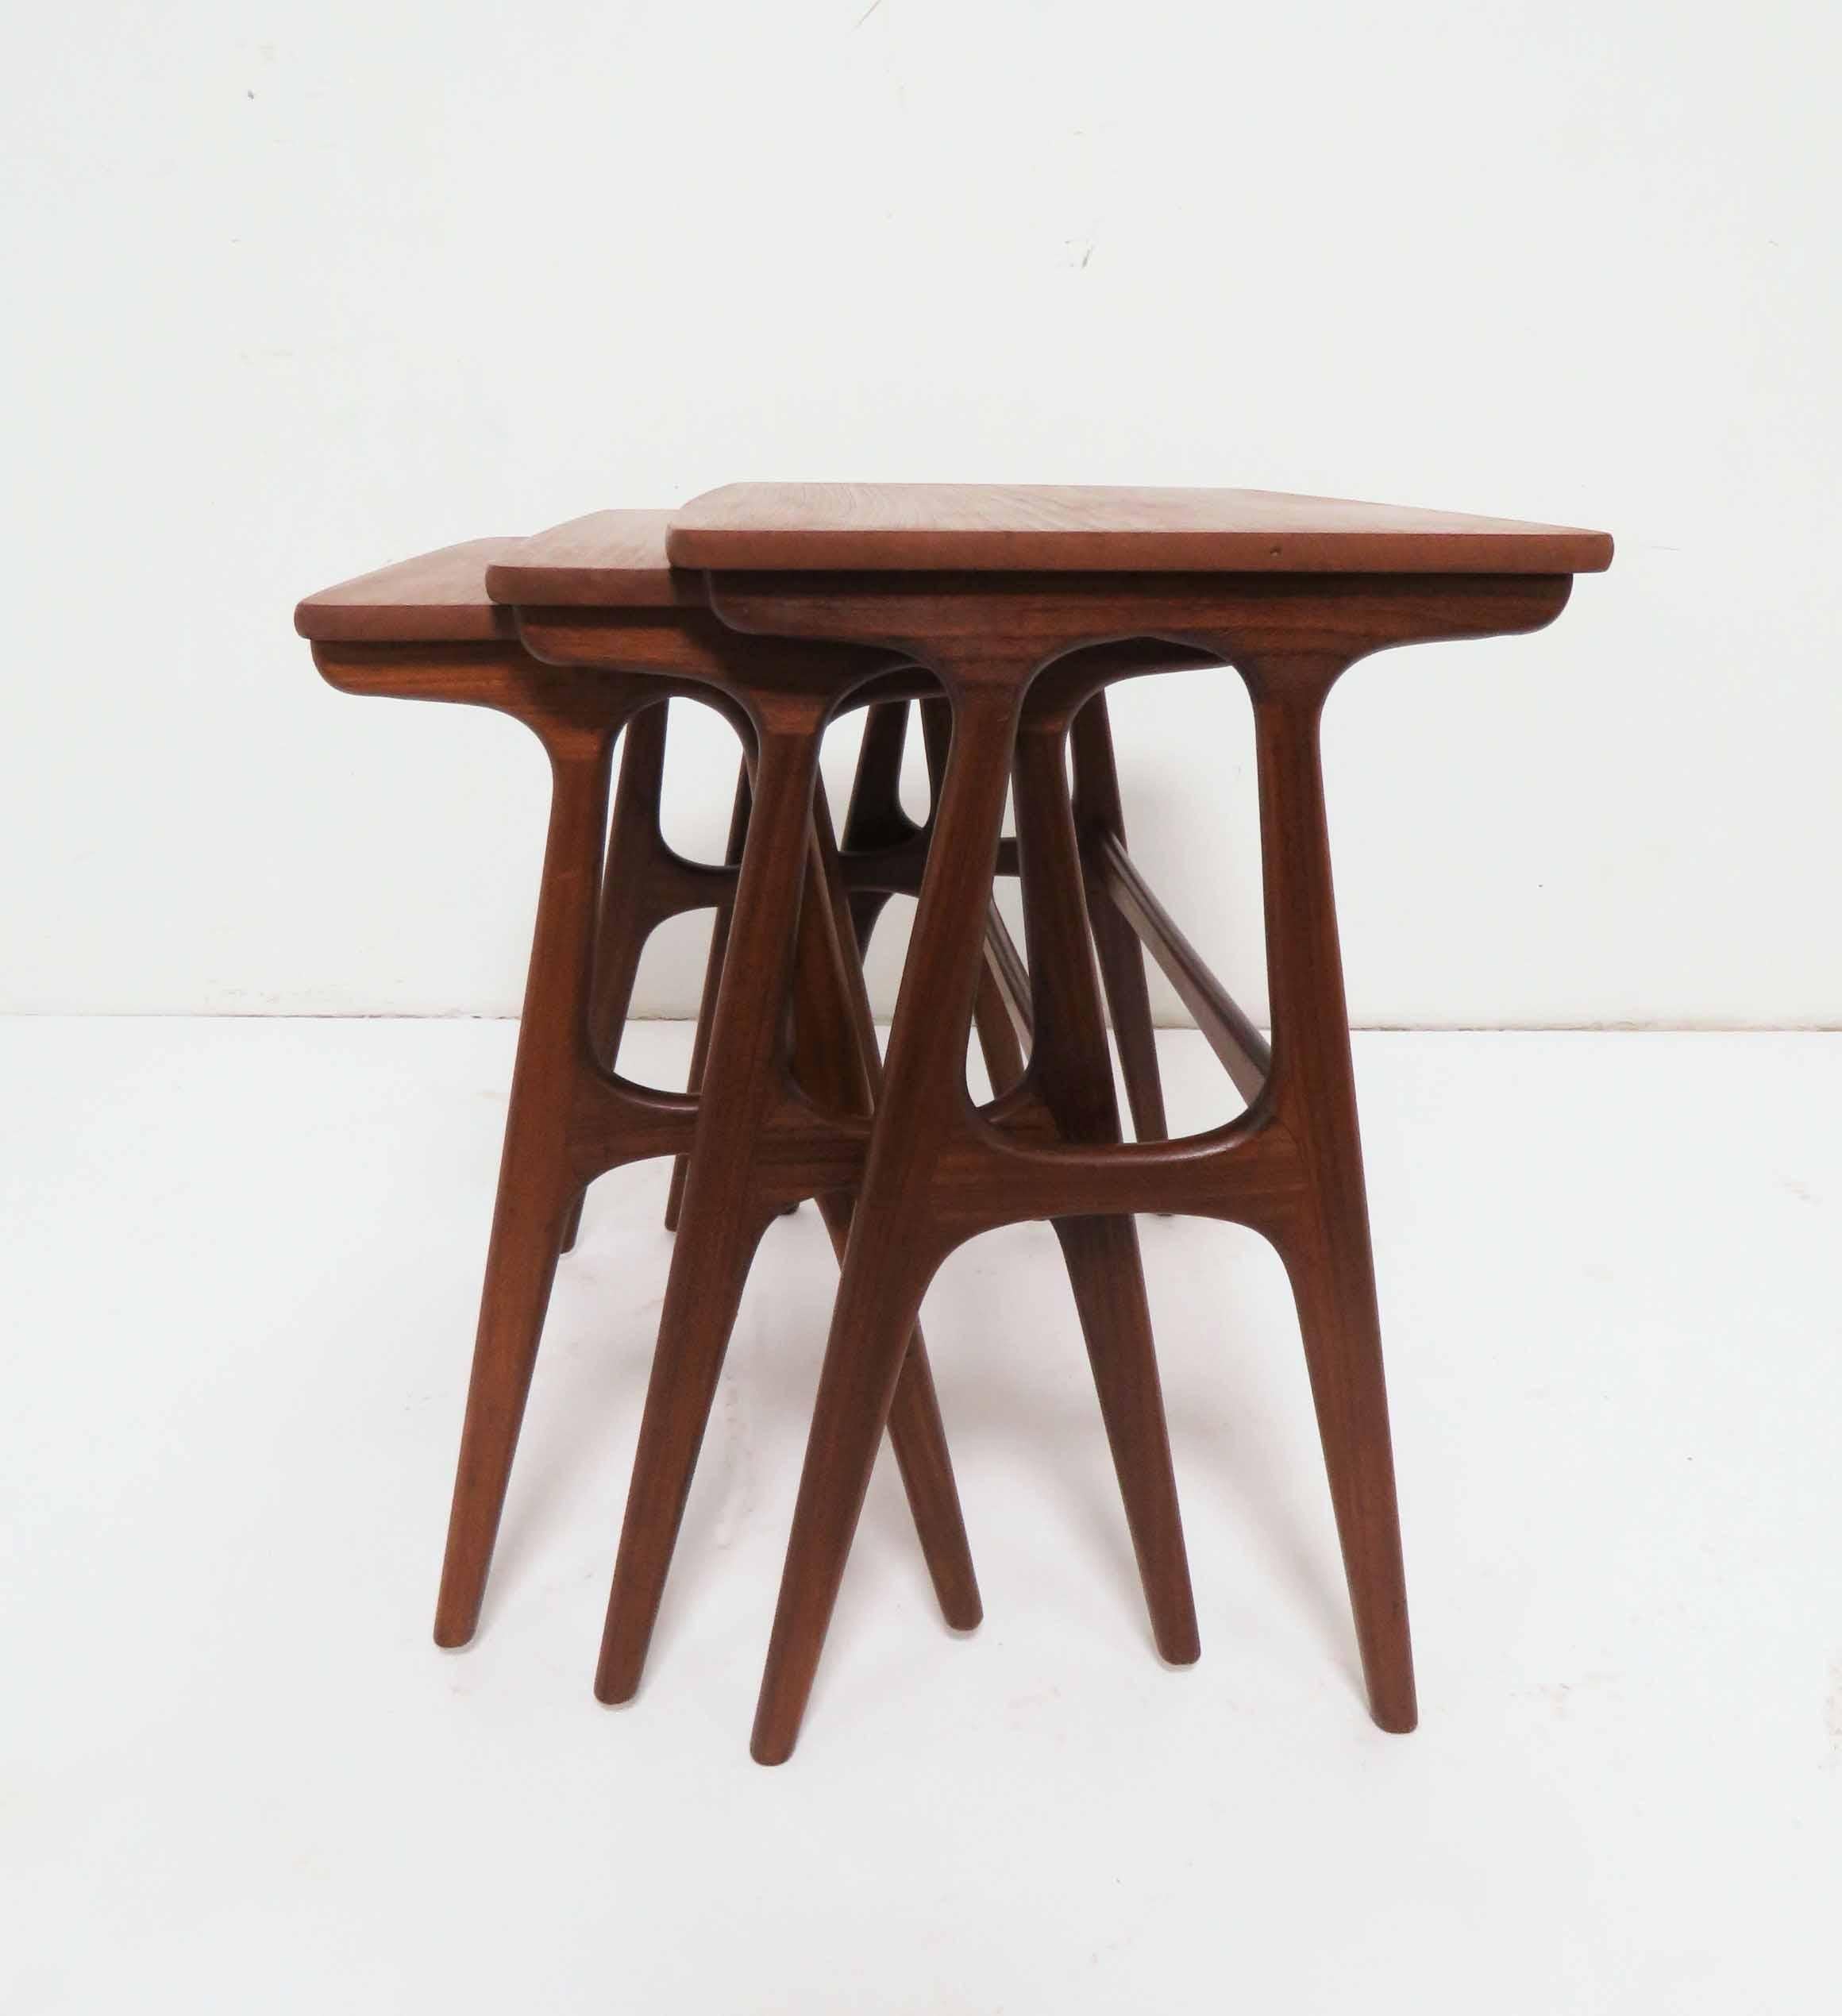 Set of Danish teak nesting tables with mahogany legs, designed by Erling Torvits for Heltborg Mobler. Made in Denmark, circa 1960s.

Largest table measures 22